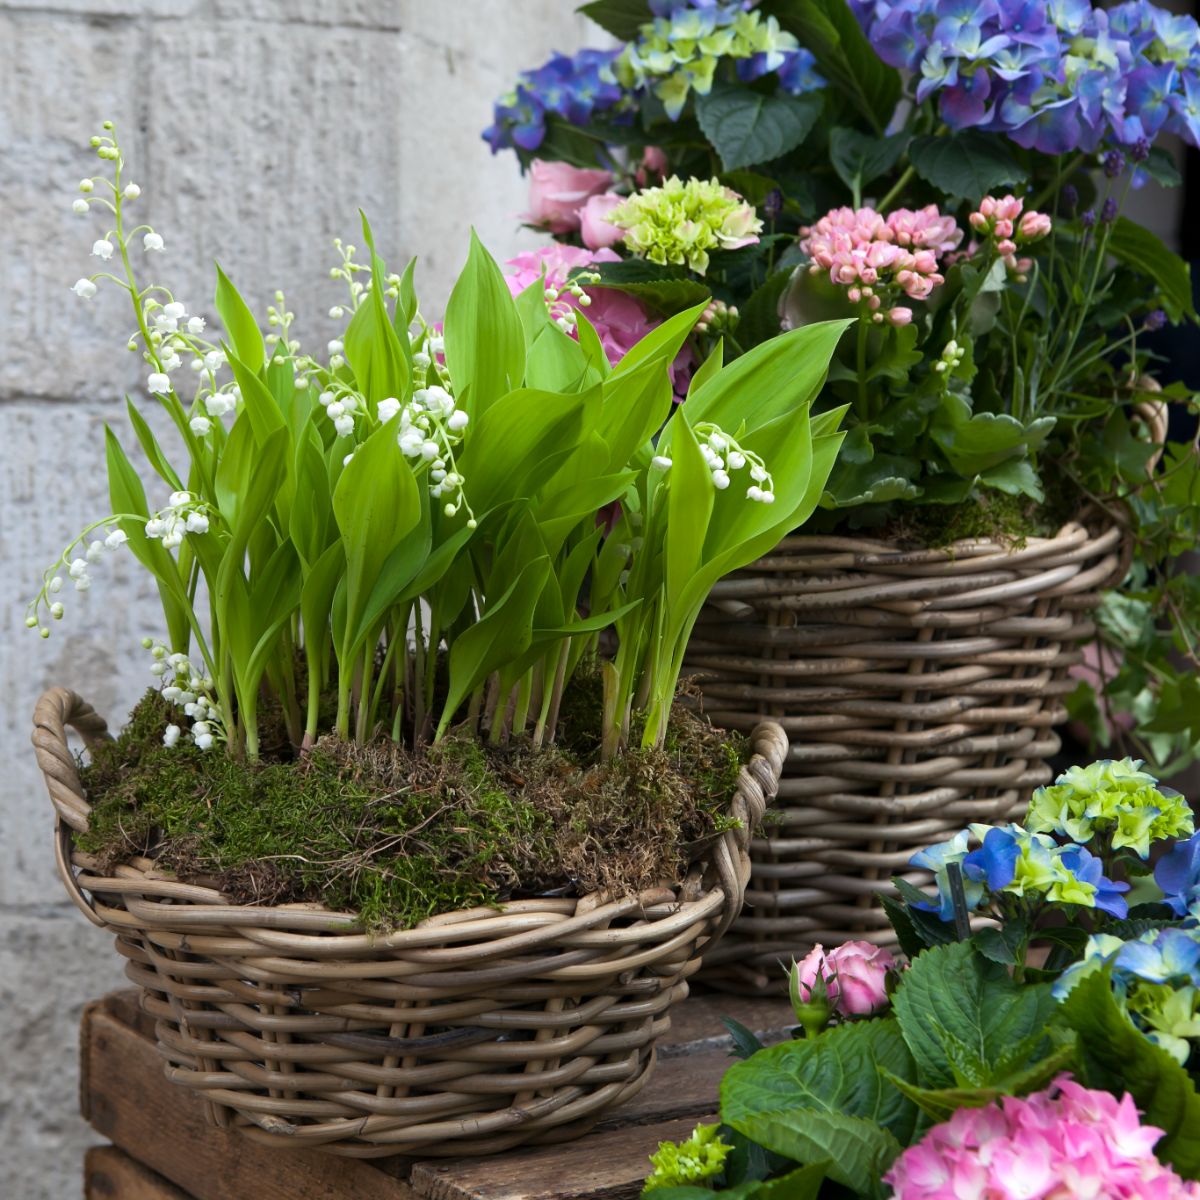 Lilies of the valley planted in a container basket